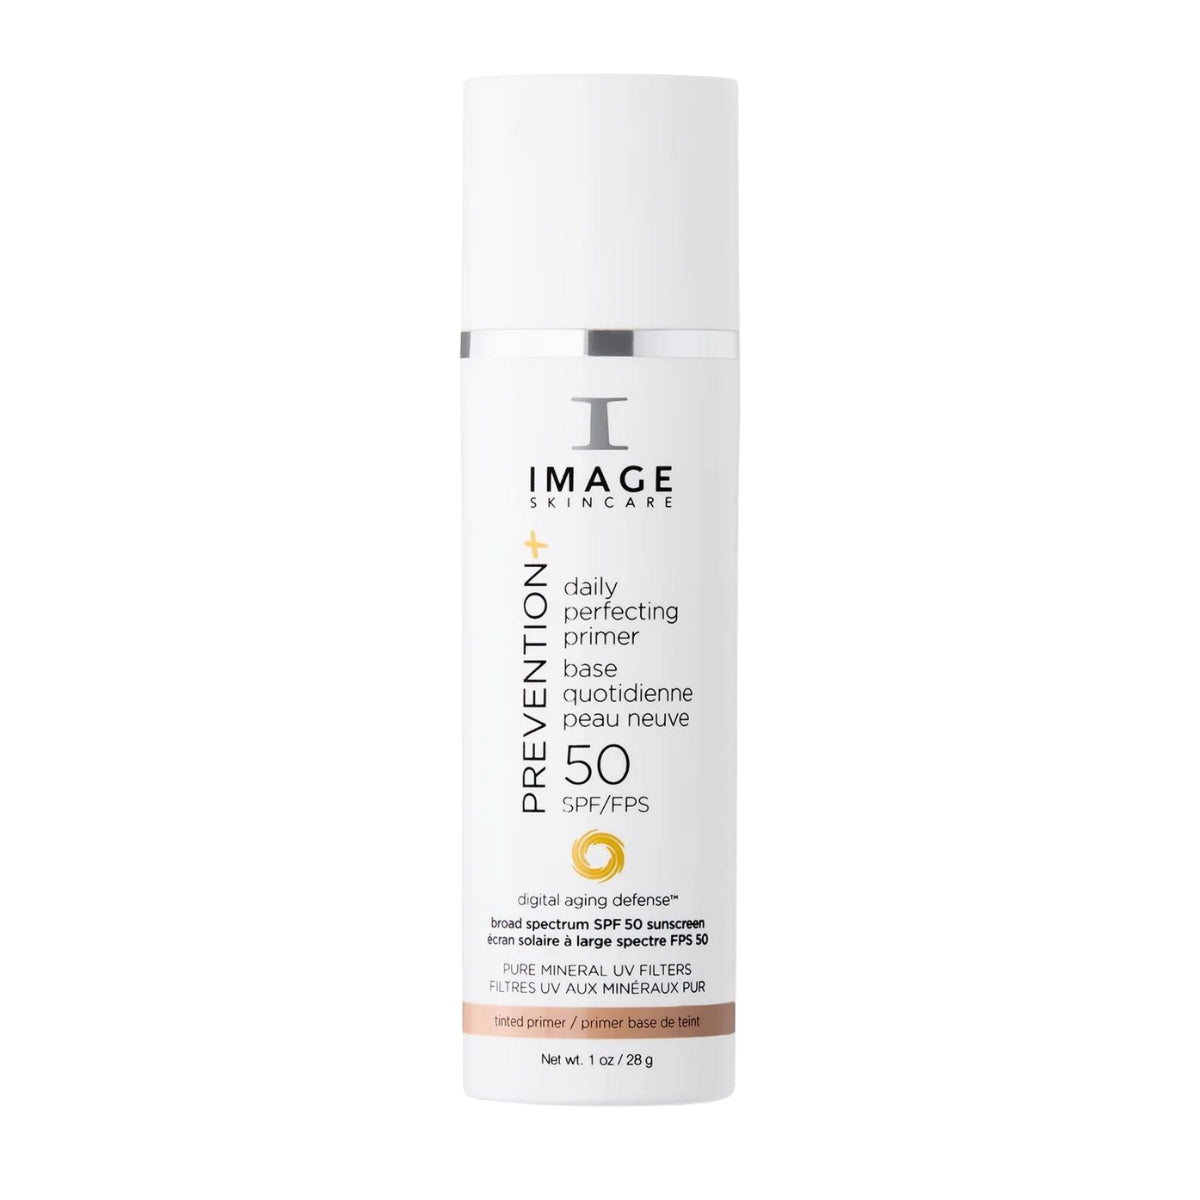 Image Skincare PREVENTION+ Daily Perfecting Primer SPF 50